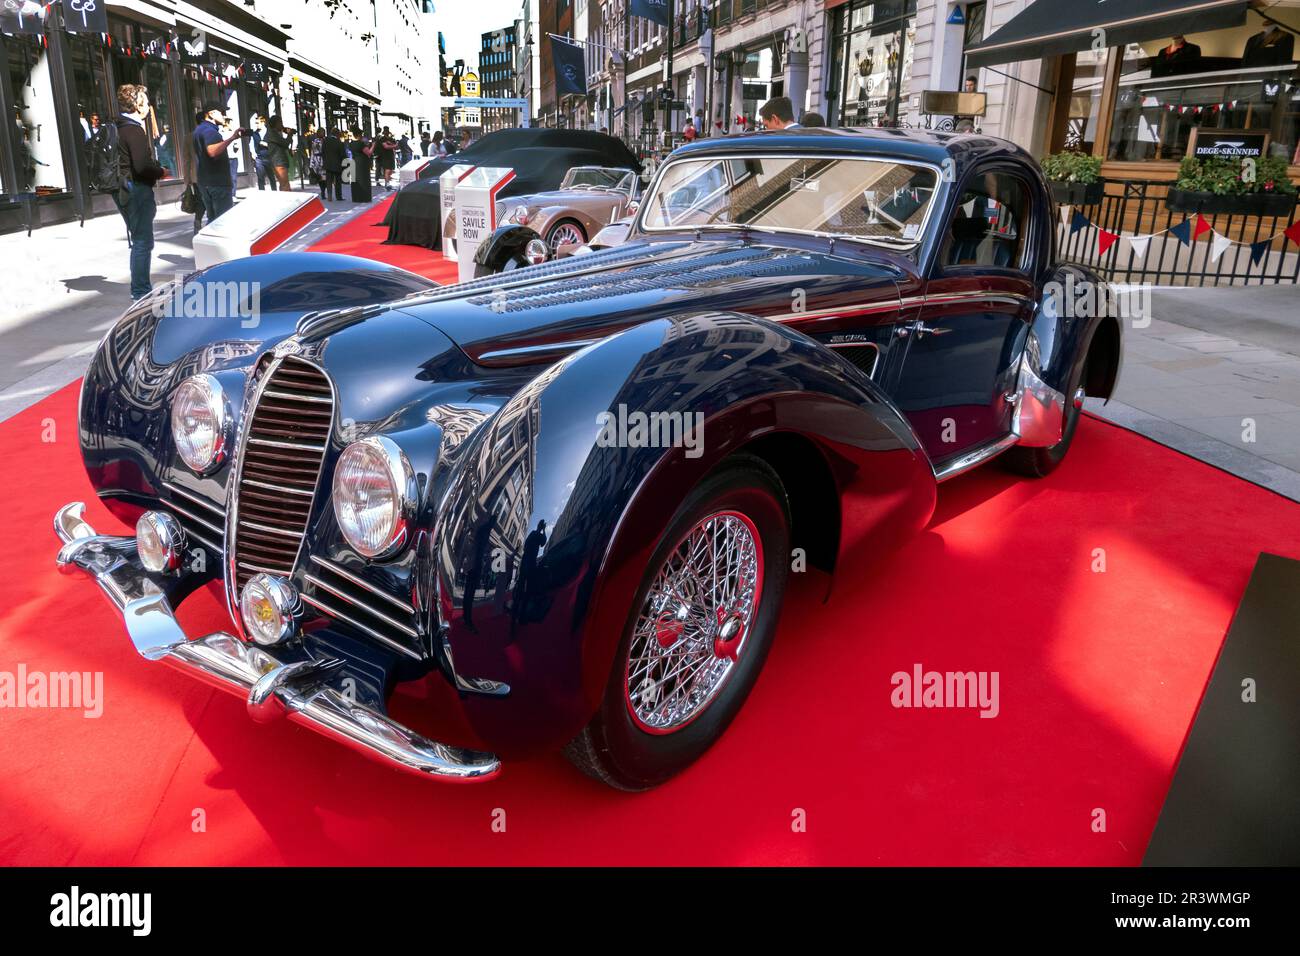 1938 Delahaye Type 145 V12 coupe at the Concours on Savile Row 2023. Classic car concours on the famous street for Tailoring in London UK Stock Photo